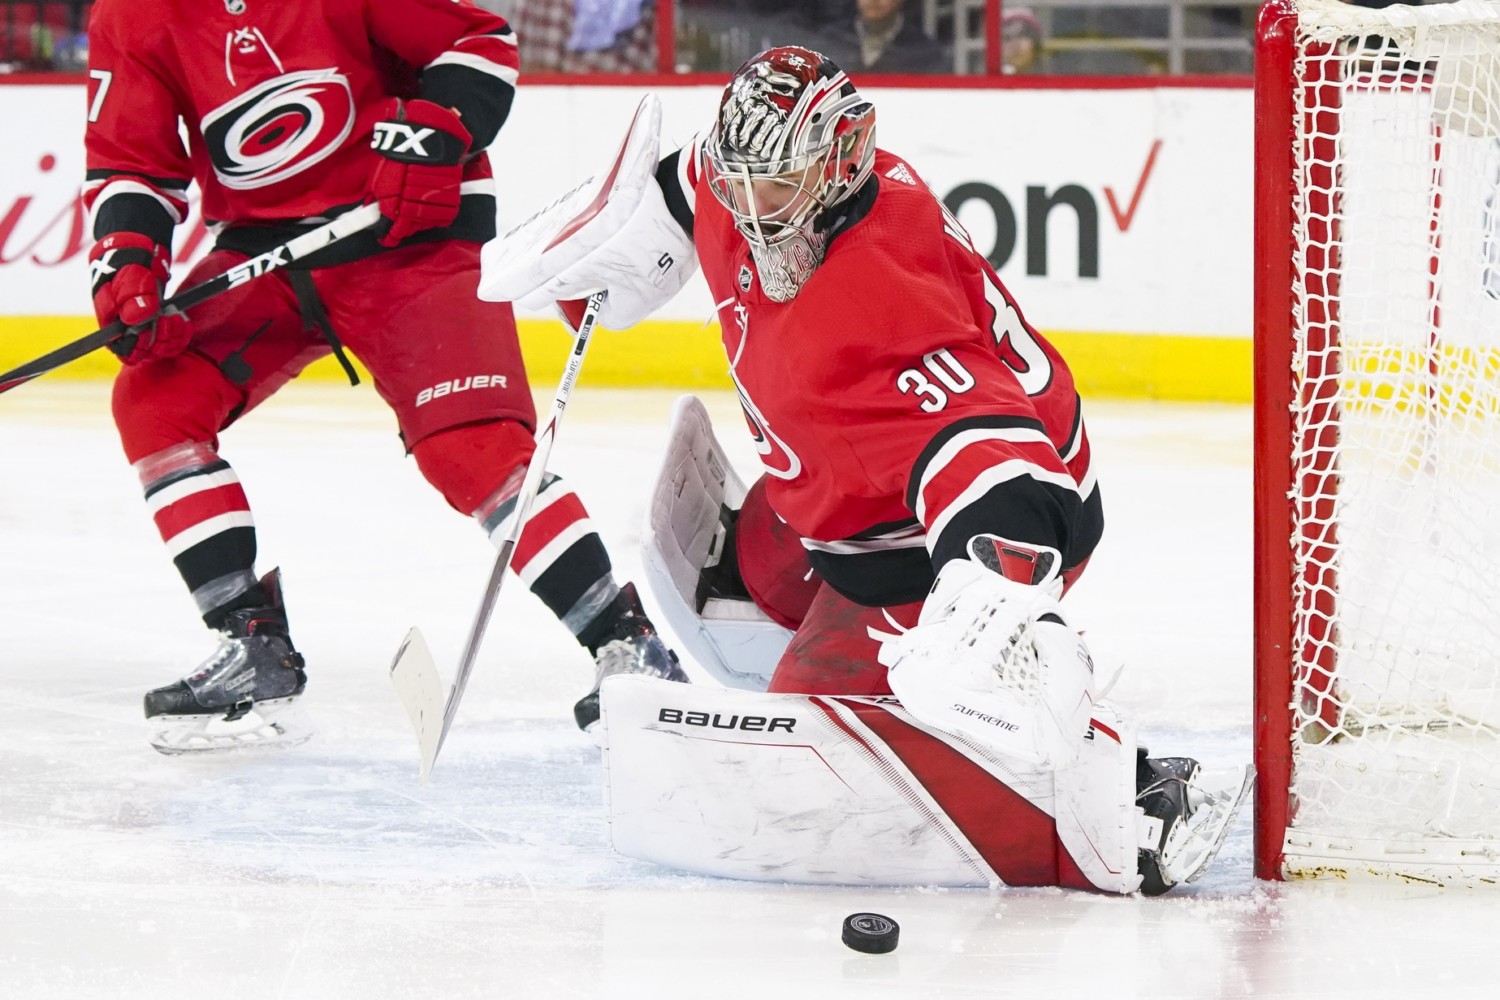 Cam Ward retires from the NHL after 14 seasons.